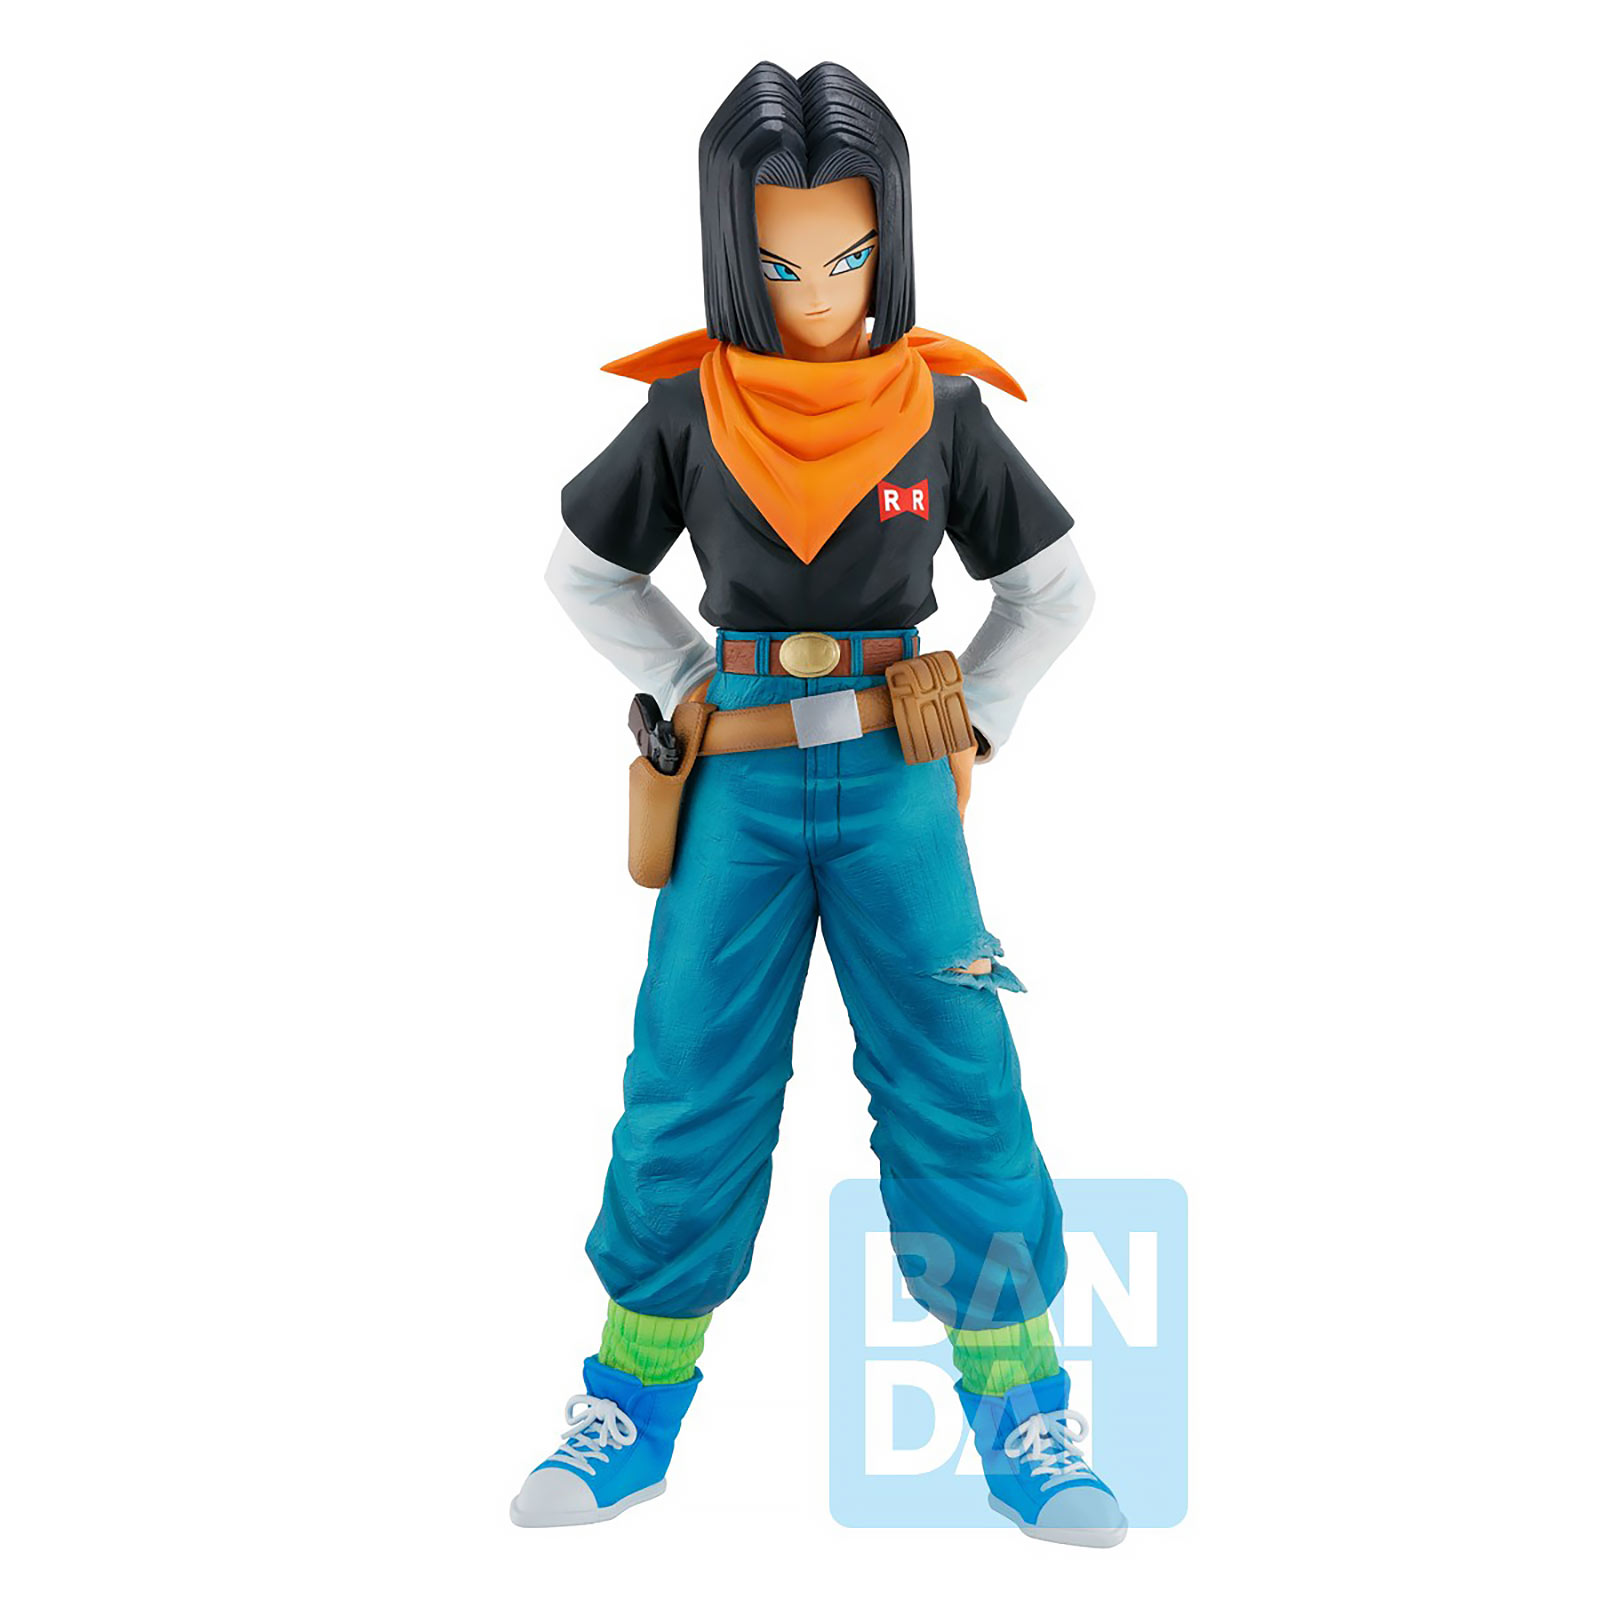 Dragon Ball Z - Android 17 Figur